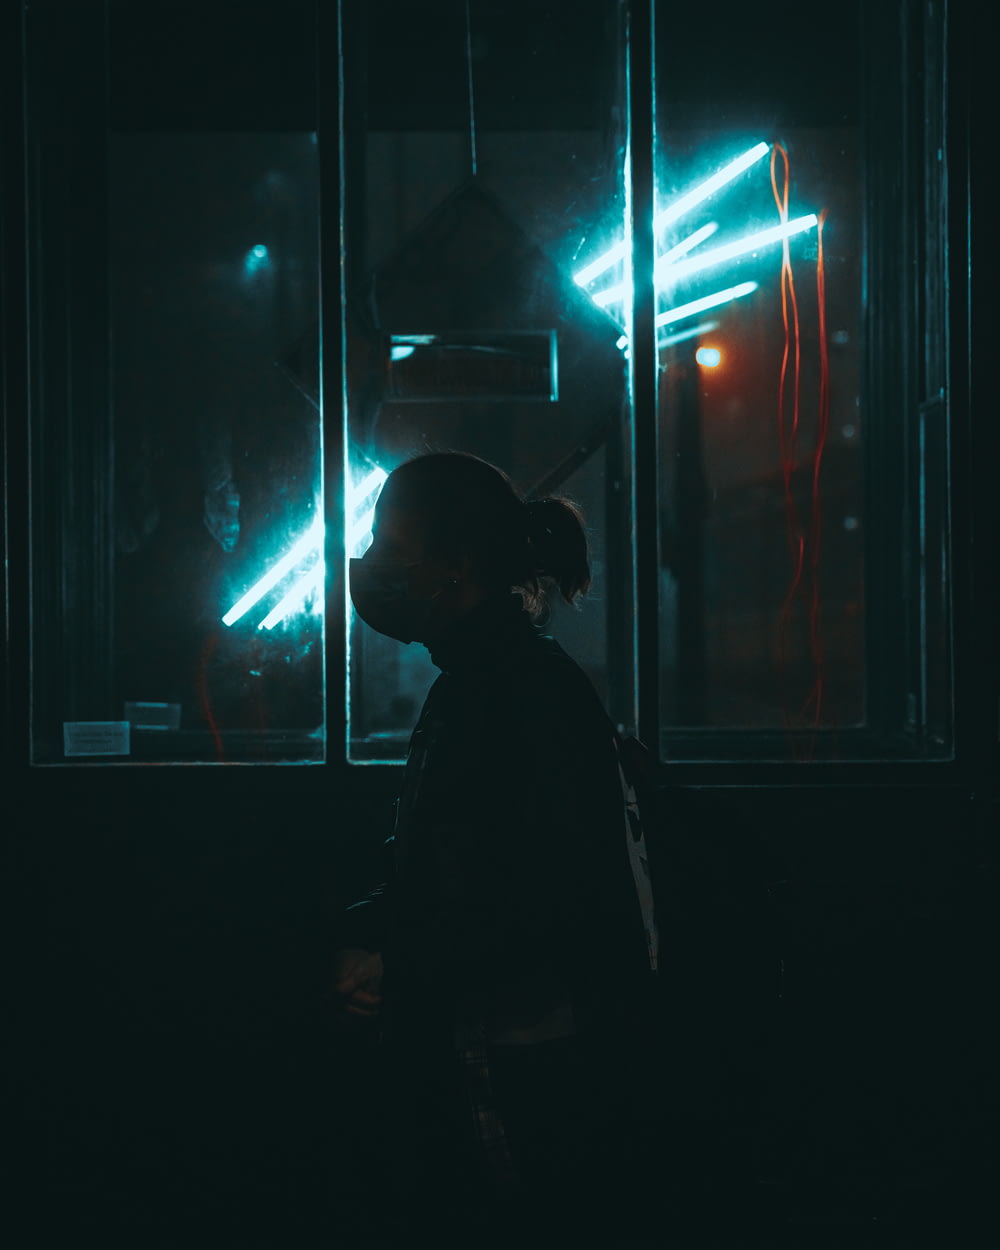 a person standing in front of a window at night